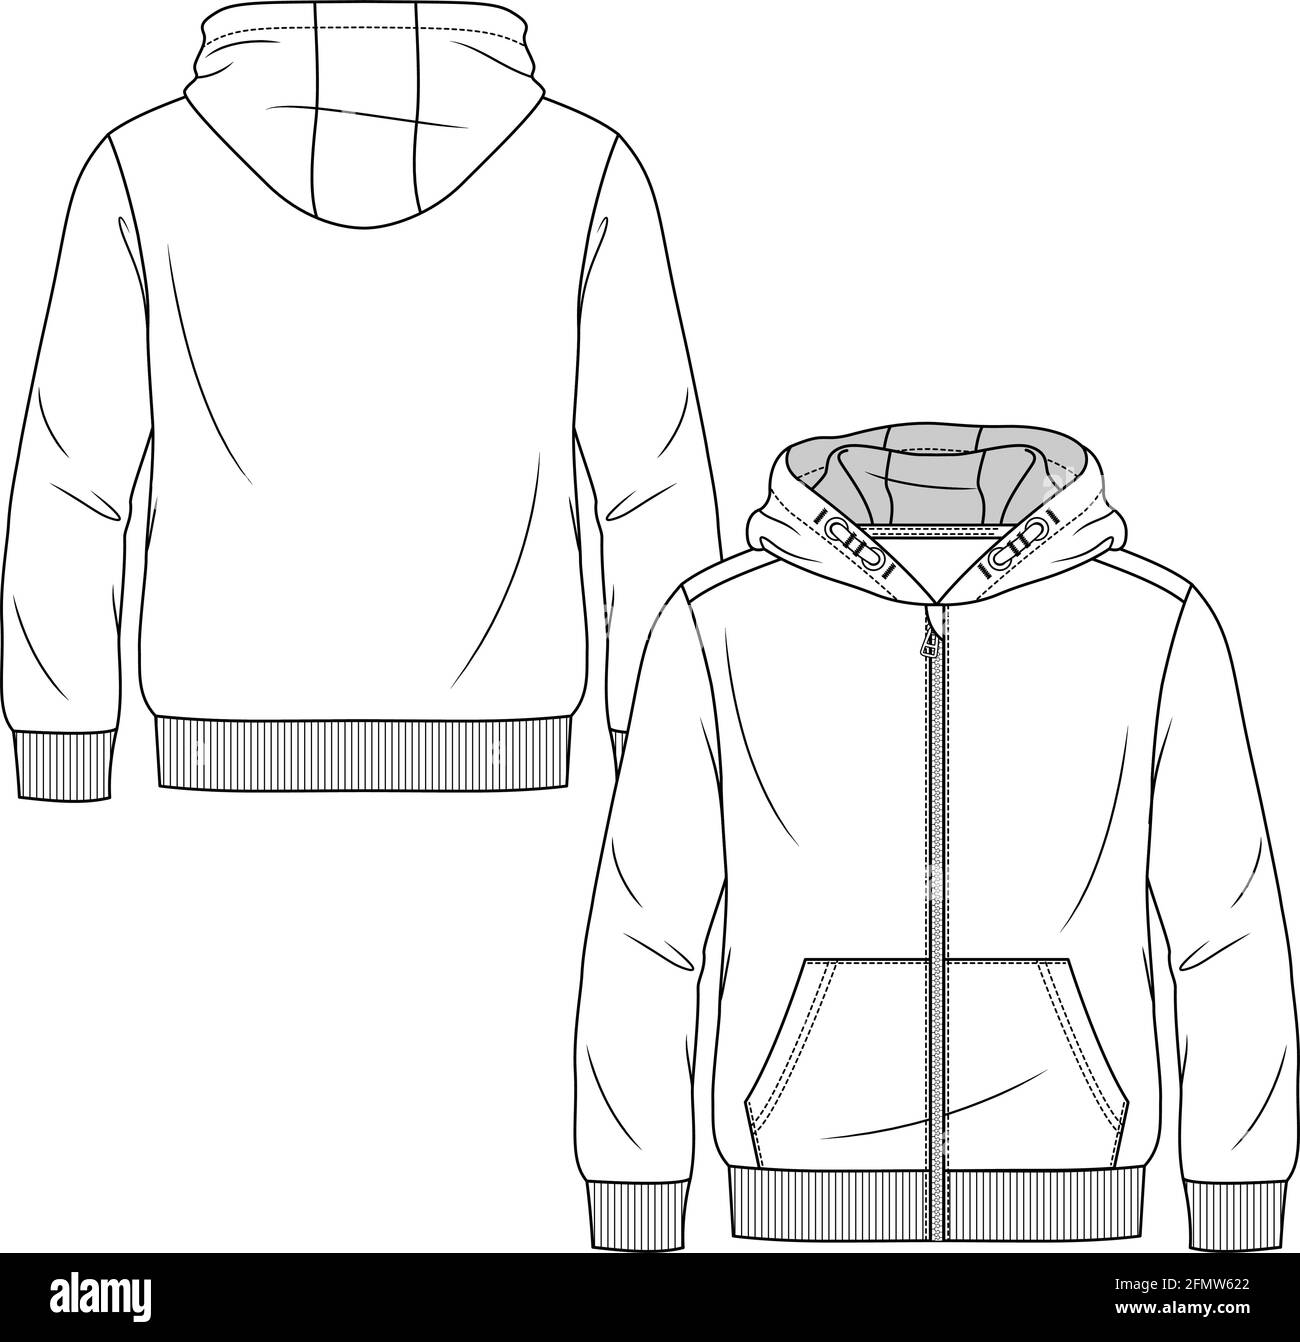 Sweatshirt Vector Art, Icons, and Graphics for Free Download